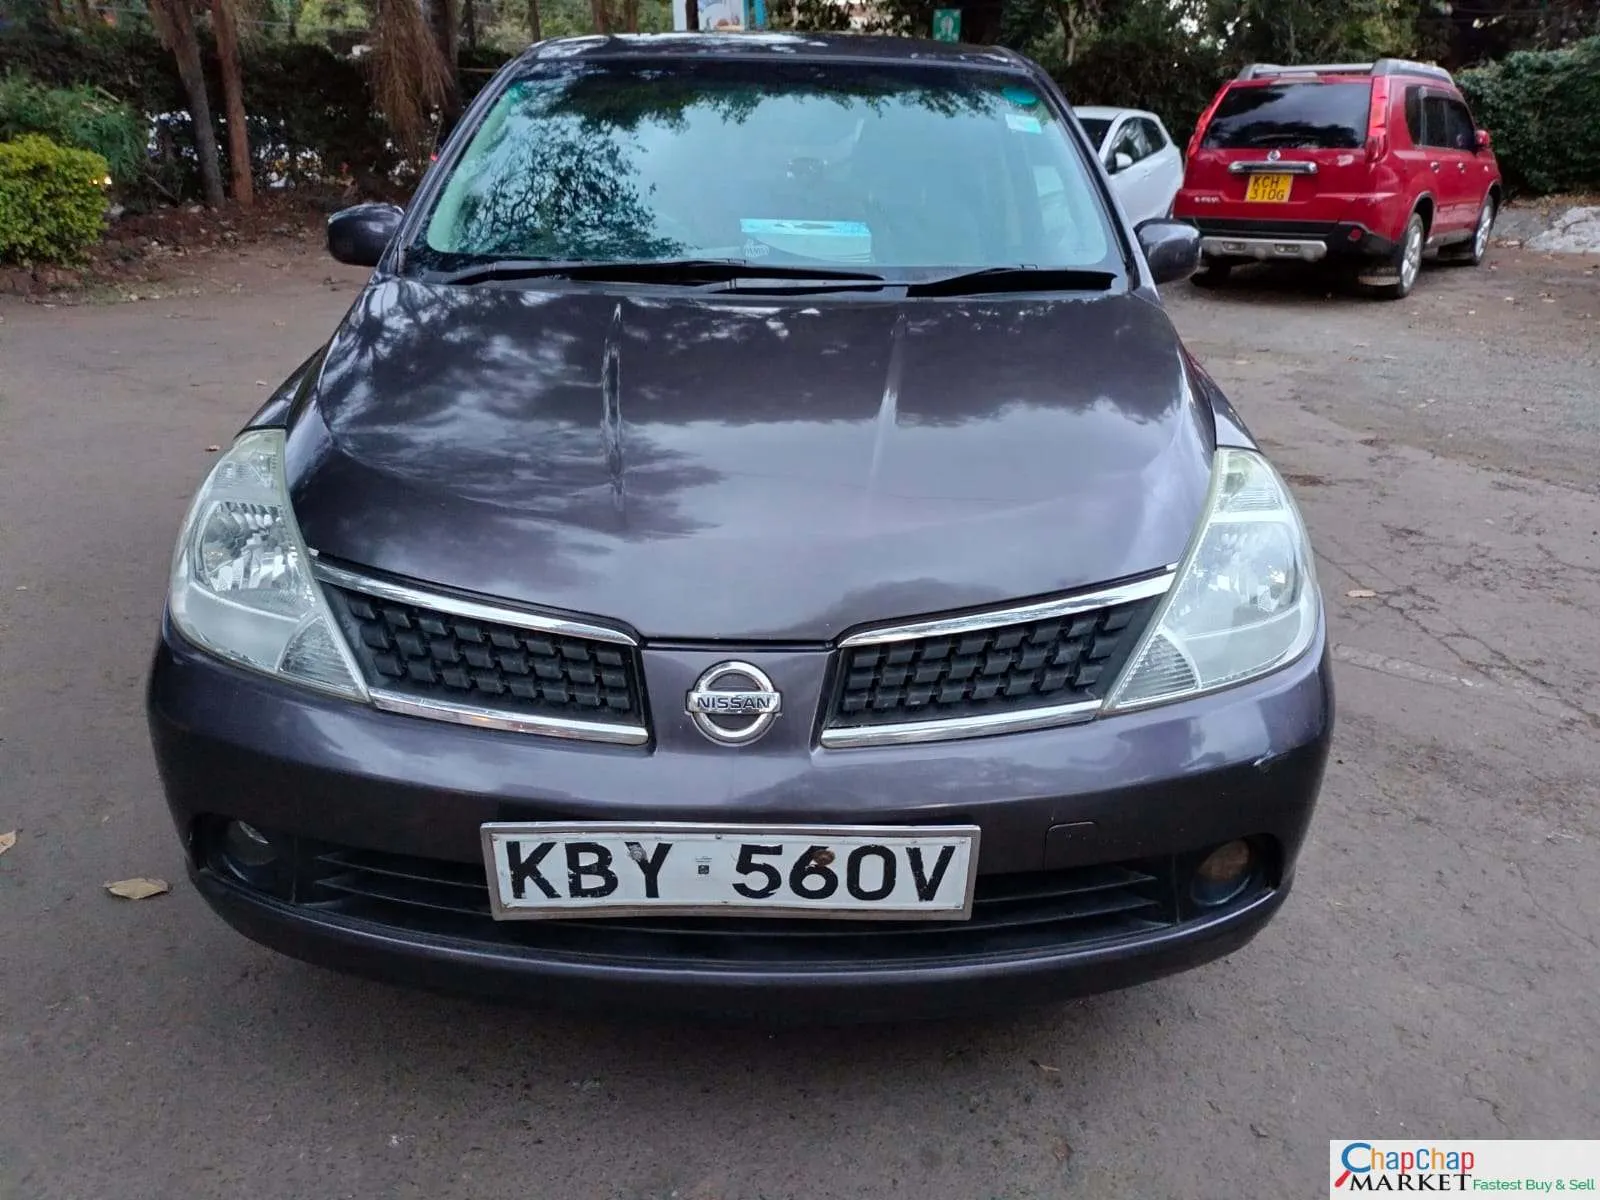 Nissan Tiida kenya You ONLY Pay 30% Deposit Trade in Ok tiida for sale in kenya hire purchase installments EXCLUSIVE hatchback